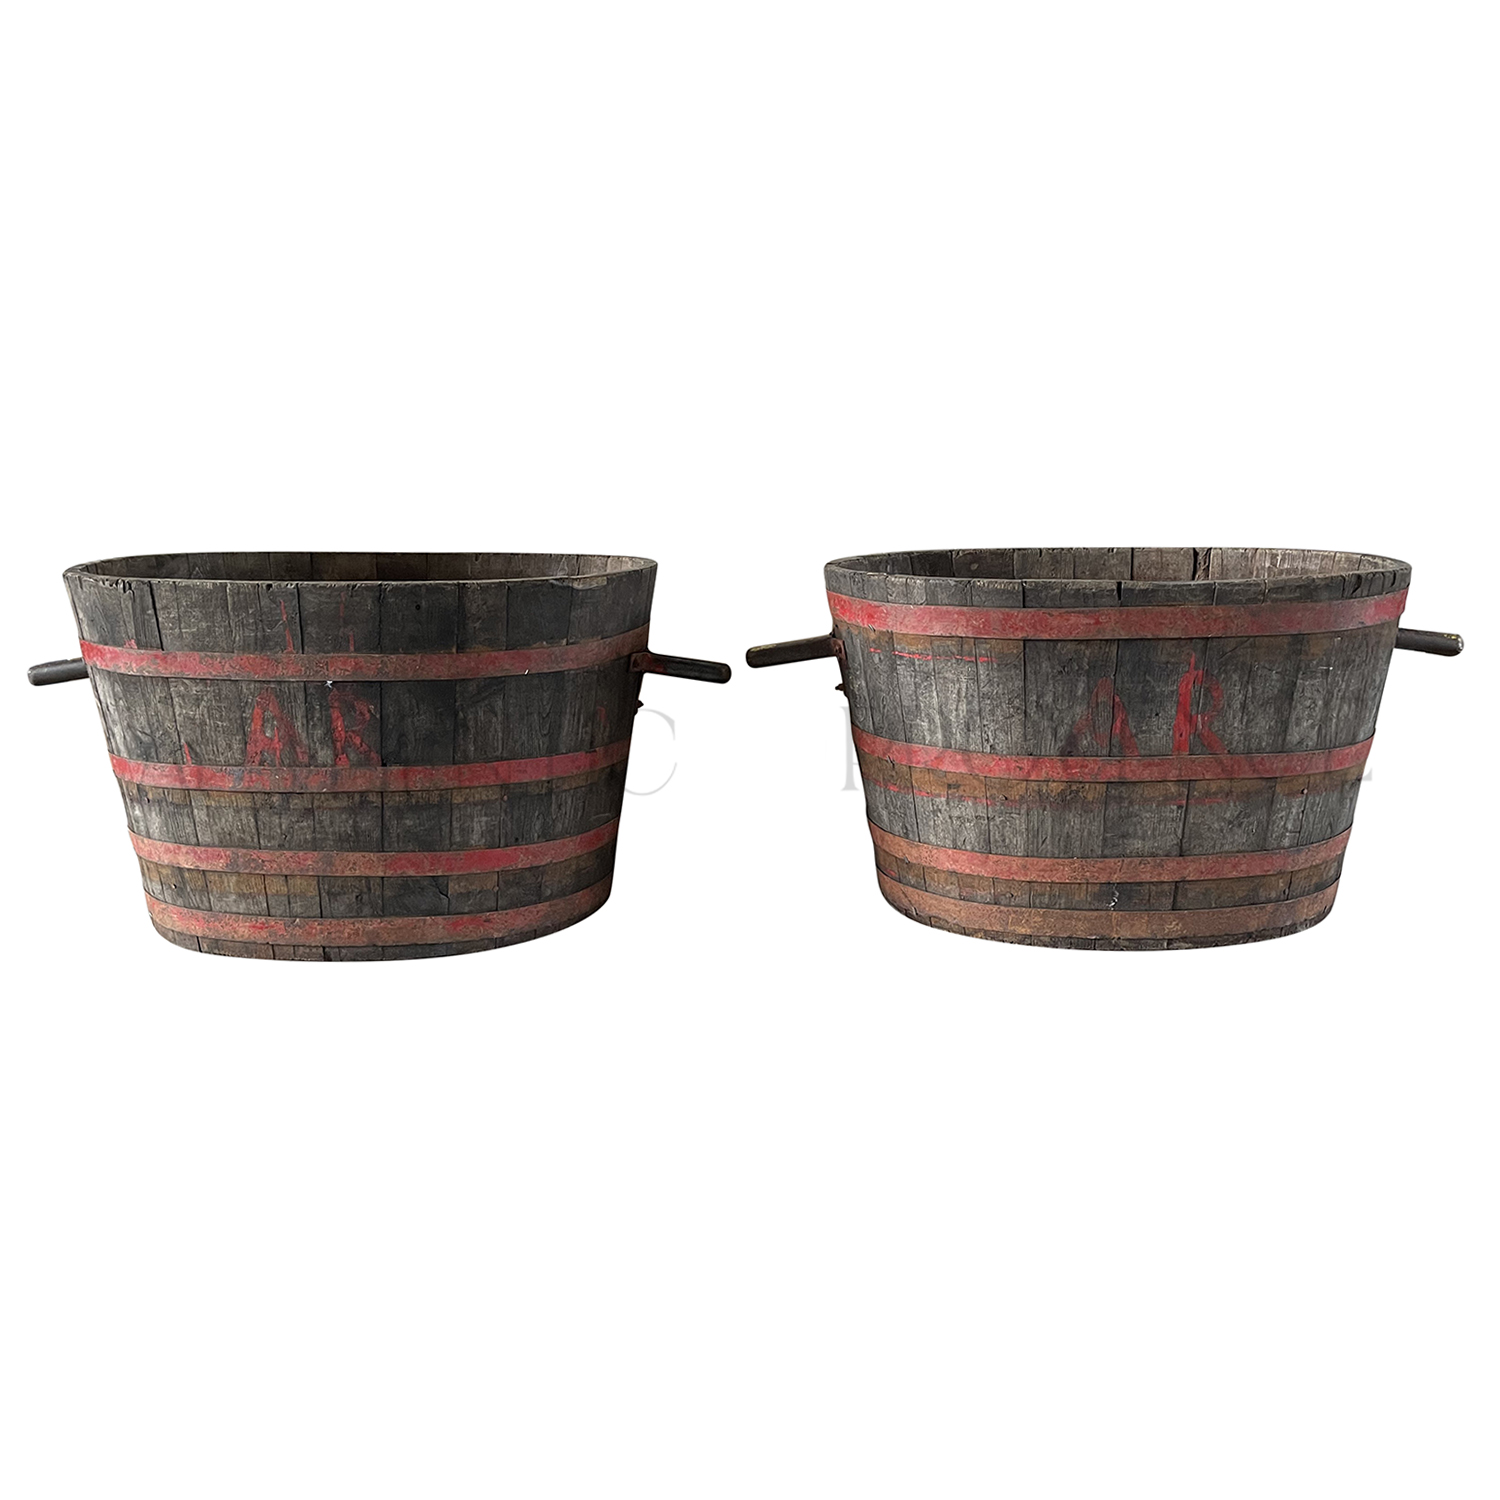 Pair of Antique Harvest Buckets from Burgundy